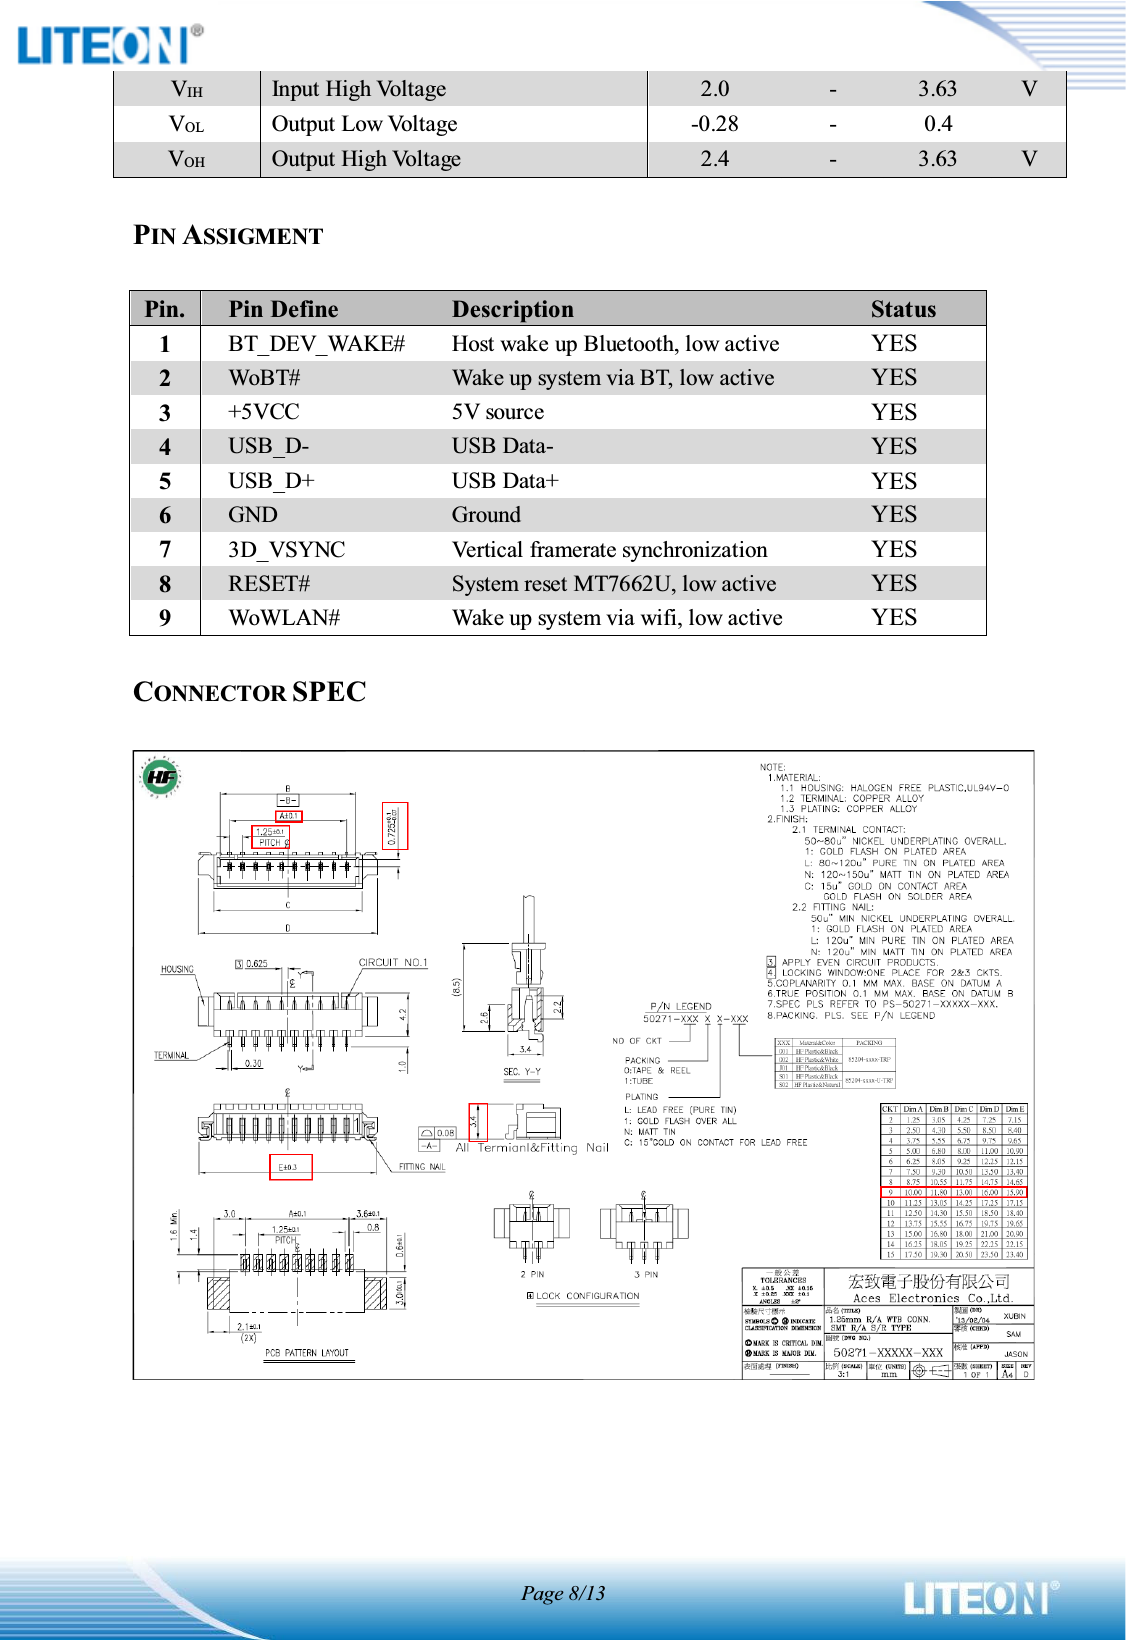 Page 8/13VIH Input High Voltage 2.0 - 3.63 V VOLOutput Low Voltage -0.28 - 0.4 VOHOutput High Voltage 2.4 - 3.63 V PIN ASSIGMENTPin. Pin Define Description Status 1 BT_DEV_WAKE# Host wake up Bluetooth, low active YES 2 WoBT# Wake up system via BT, low active YES 3 +5VCC 5V source YES 4 USB_D- USB Data- YES 5 USB_D+ USB Data+ YES 6GND Ground YES 7 3D_VSYNC Vertical framerate synchronization YES 8 RESET# System reset MT7662U, low active YES 9 WoWLAN# Wake up system via wifi, low active YES CONNECTOR SPEC 